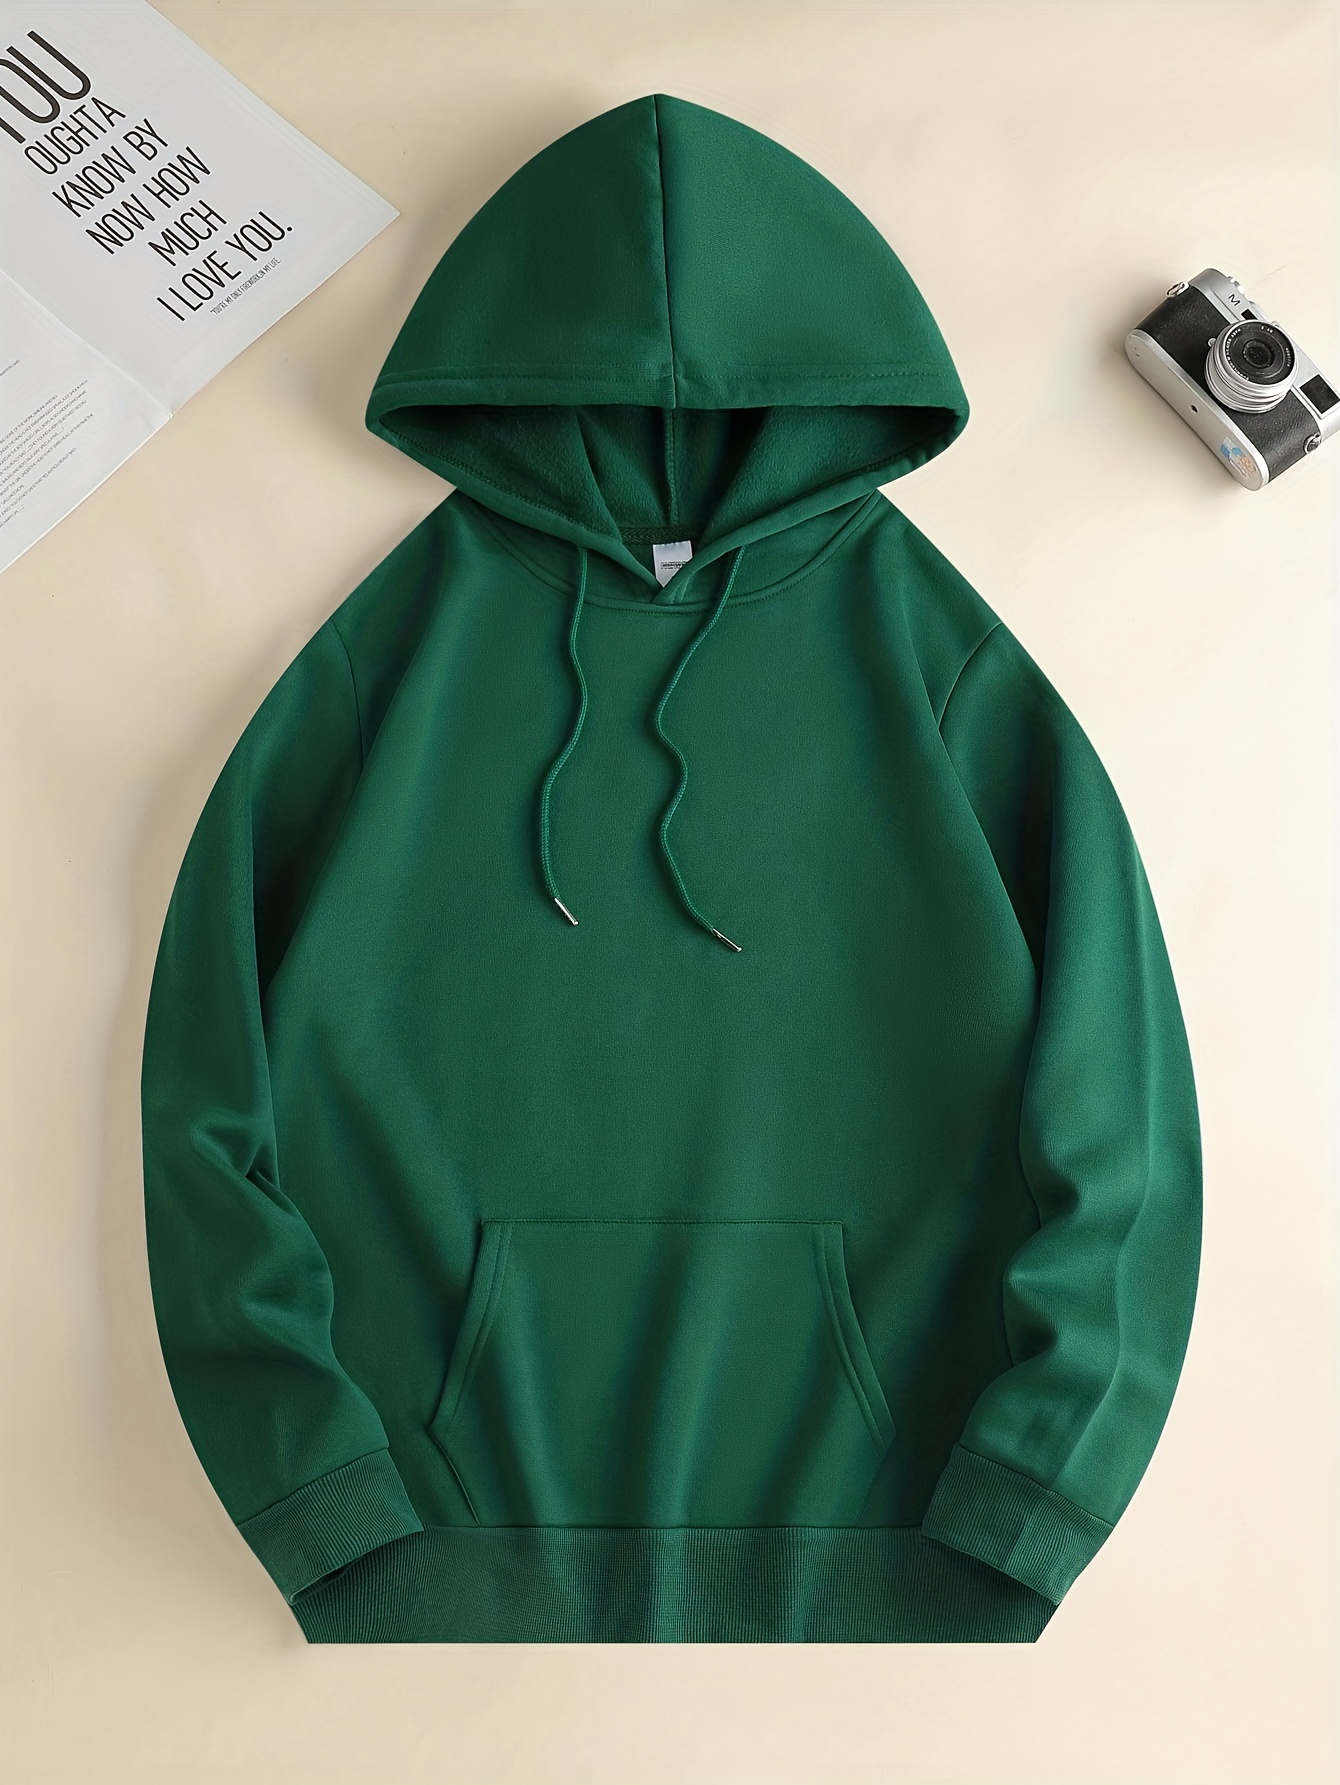 solid color hoodies for men hoodie with kangaroo pocket comfy loose trendy hooded pullover mens clothing for autumn winter details 12